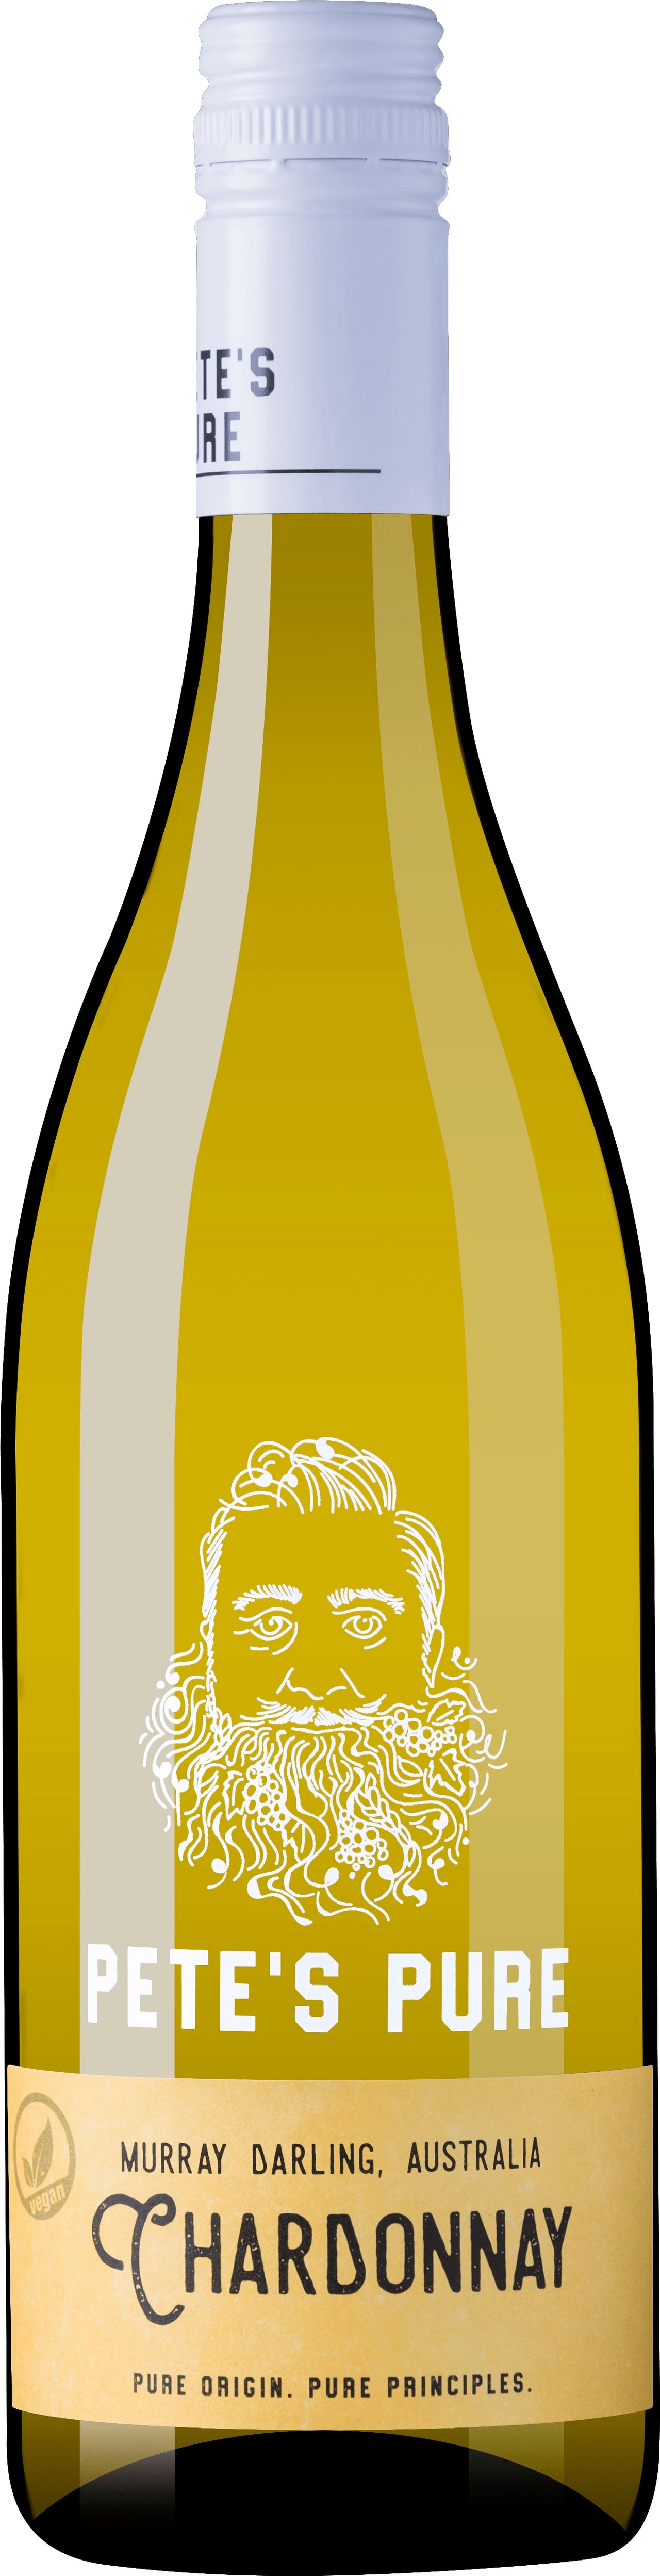 Chardonnay 22 Pete's Pure 75cl - Buy Pete's Pure Wine Wines from GREAT WINES DIRECT wine shop